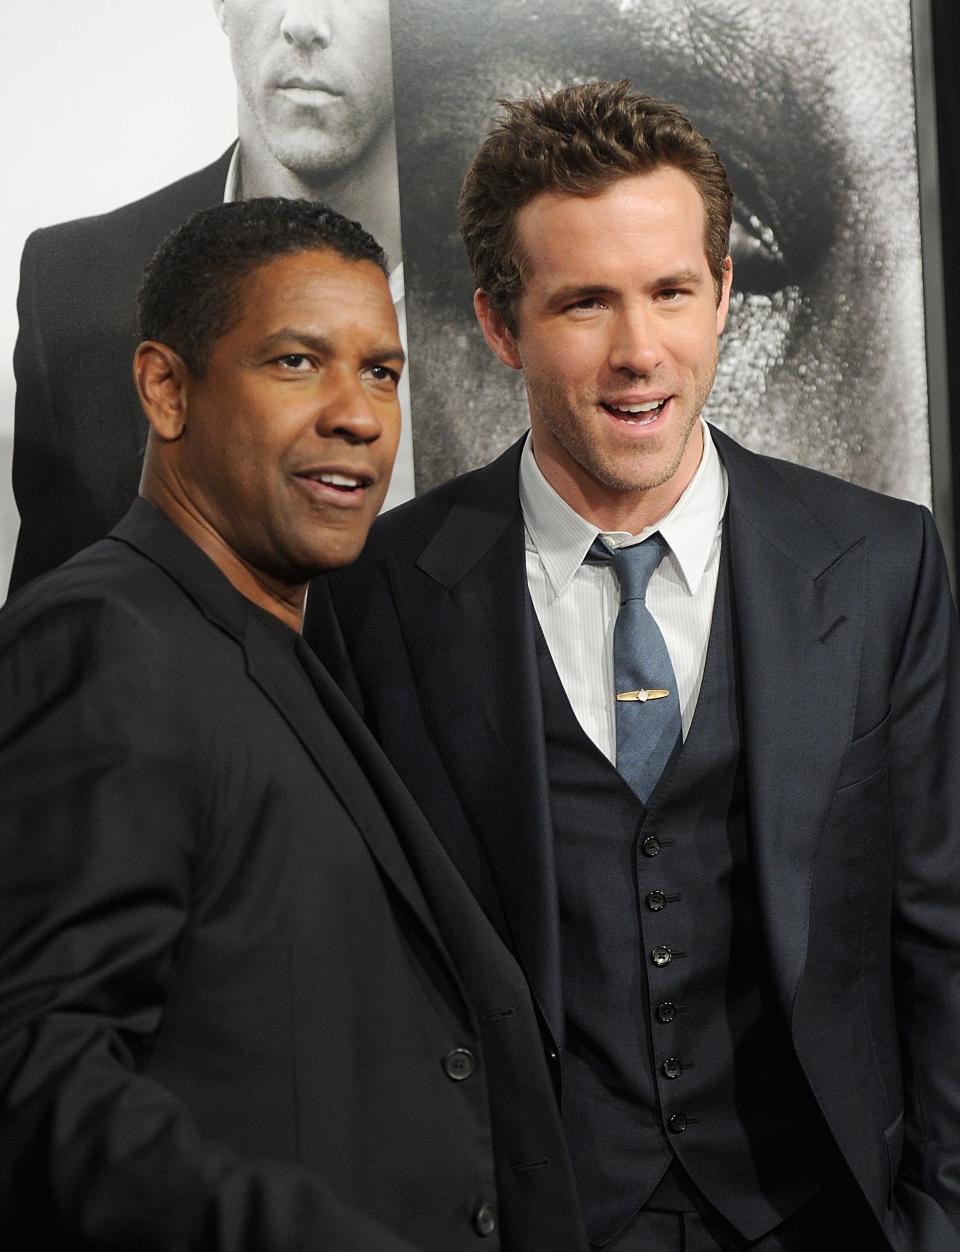 Denzel Washington and Ryan Reynolds attend the "Safe House" premiere at the SVA Theater on February 7, 2012 in New York City.